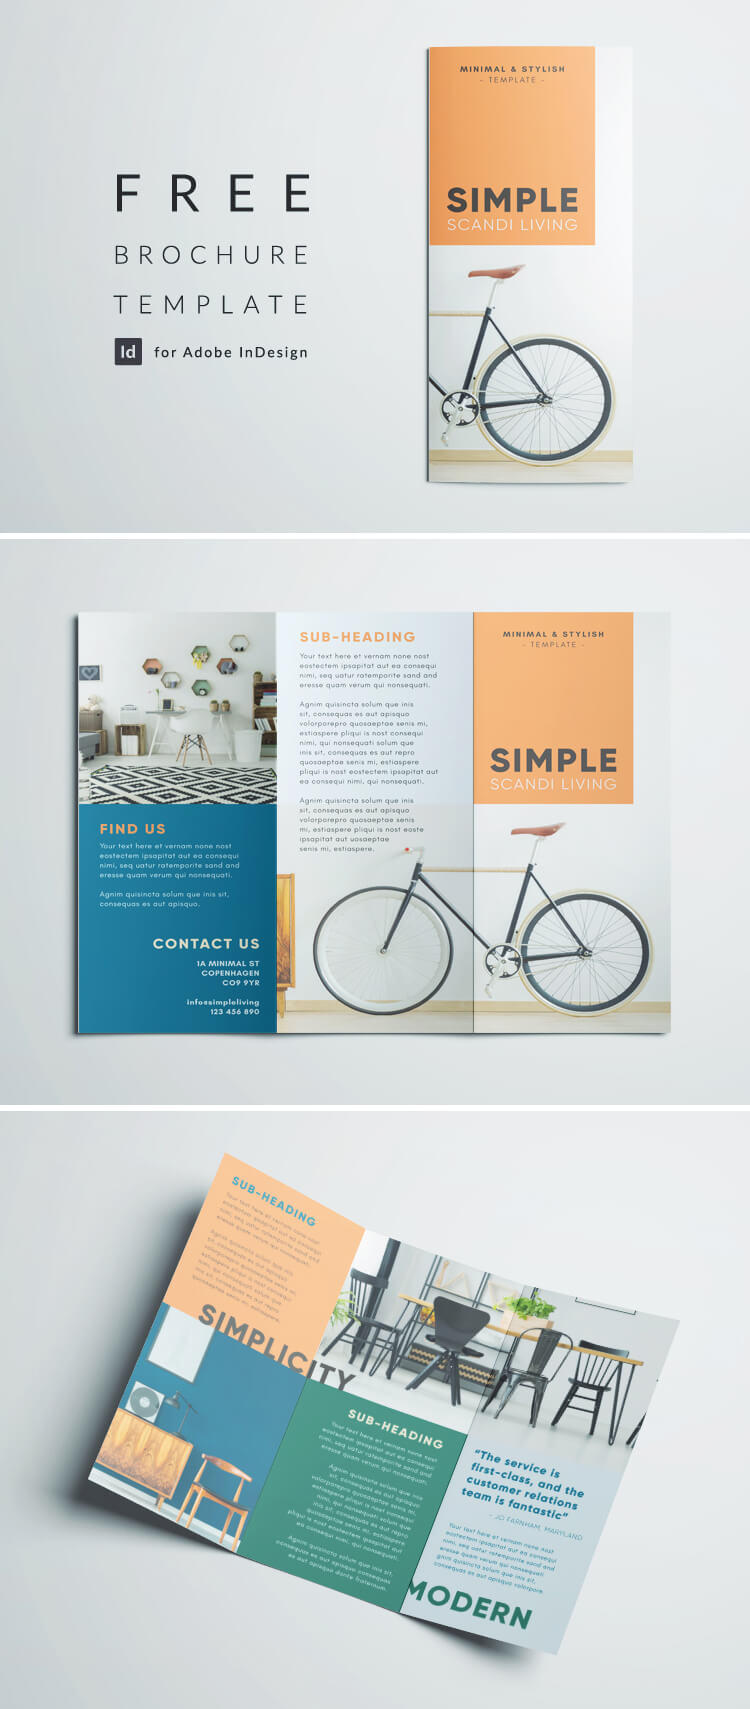 Simple triold brochure template - Free InDesign template download - simple, minimalist, scandi brochure layout free template